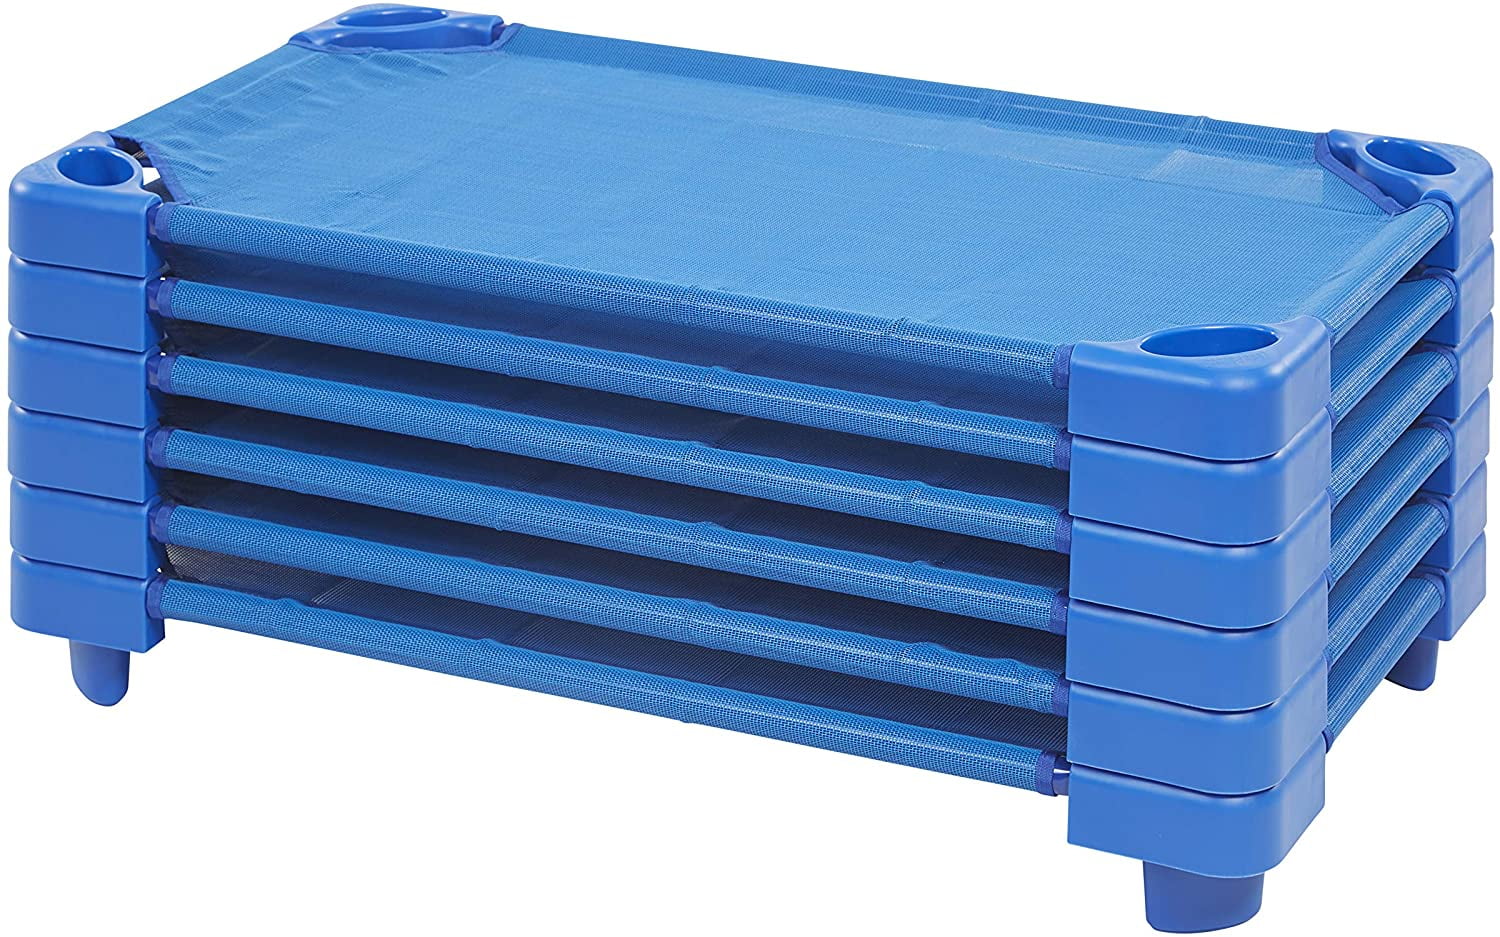 Assembled 40 L x 23 W Blue Stackable Daycare Sleeping Cot for Kids ECR4Kids Toddler Naptime Cot 